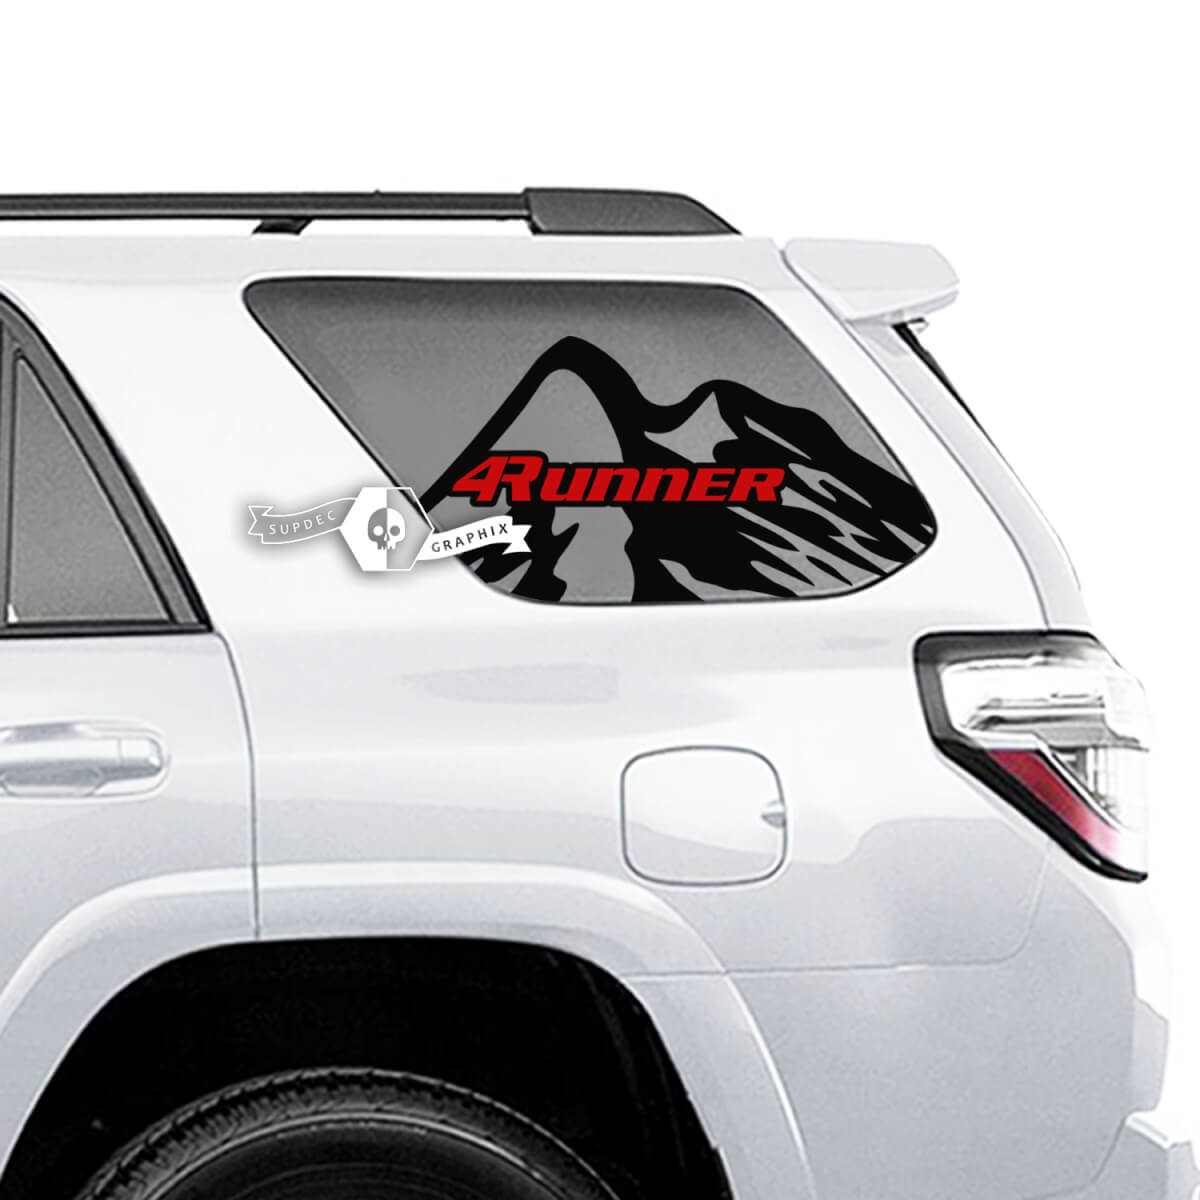 Pair of 4Runner Window Mountains Logo Side Vinyl Decals Stickers for Toyota 4Runner - 2 Colors
